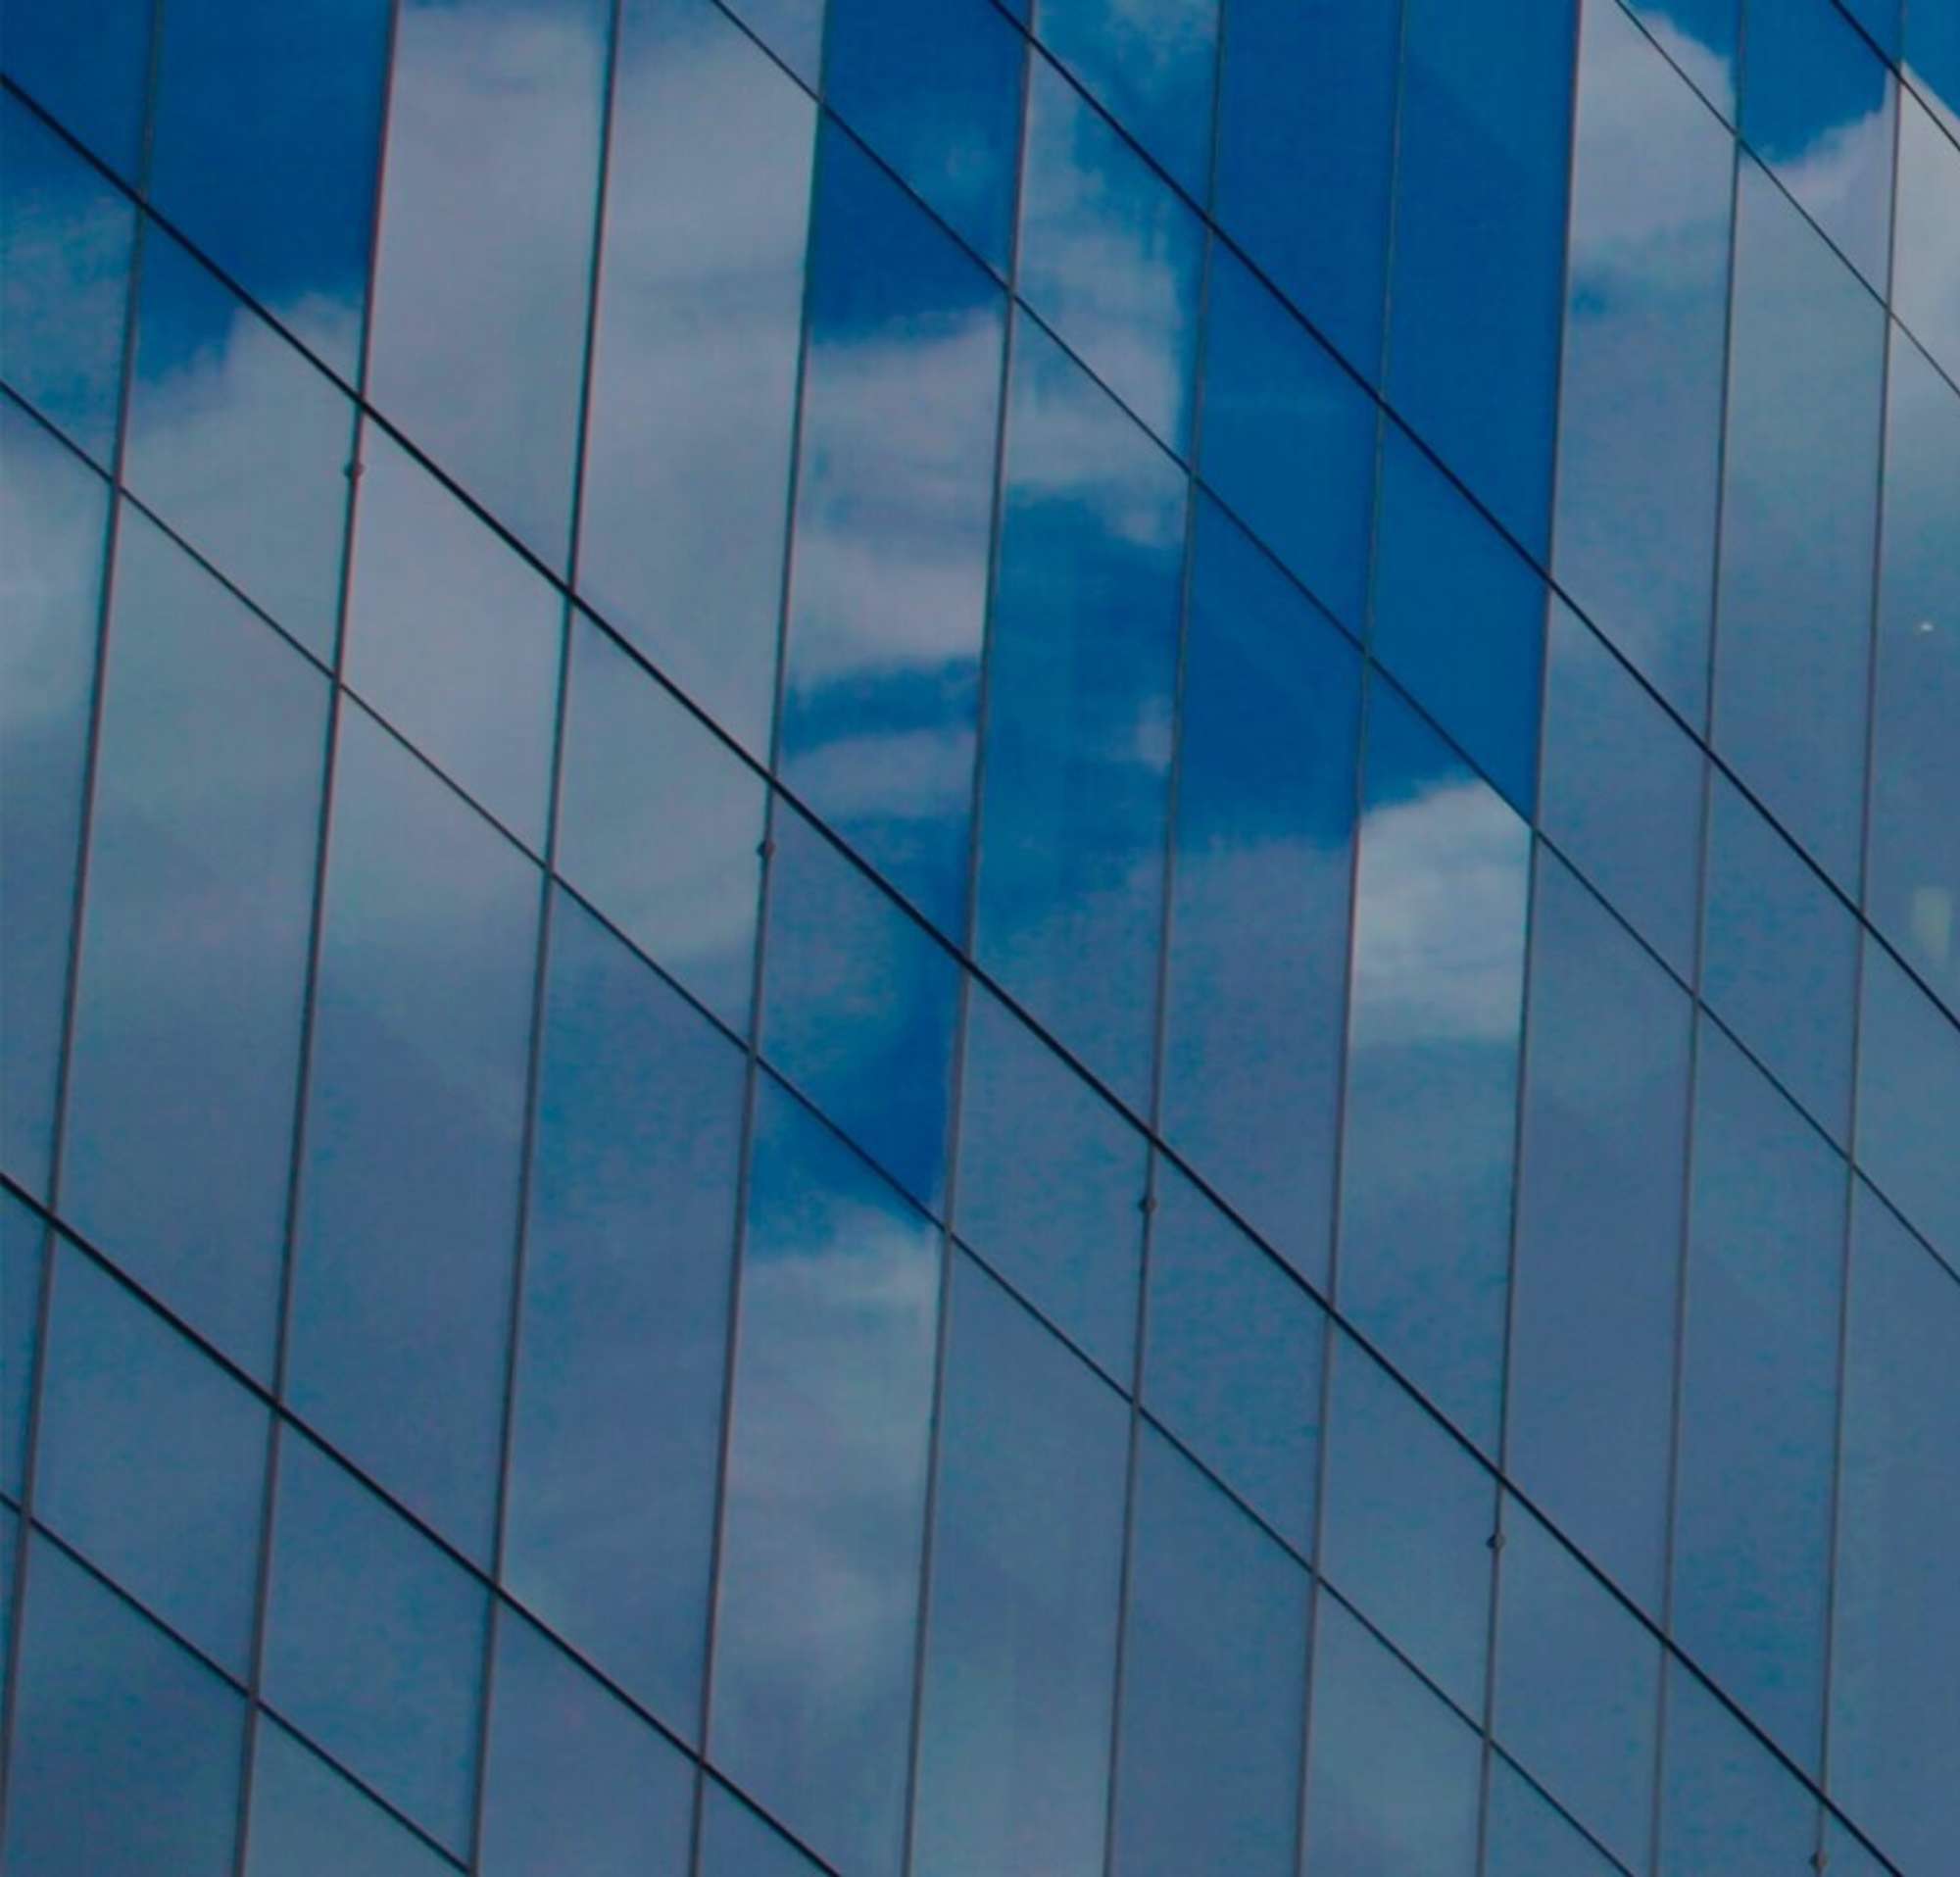 Glass windows on a high rise building, reflecting clouds.